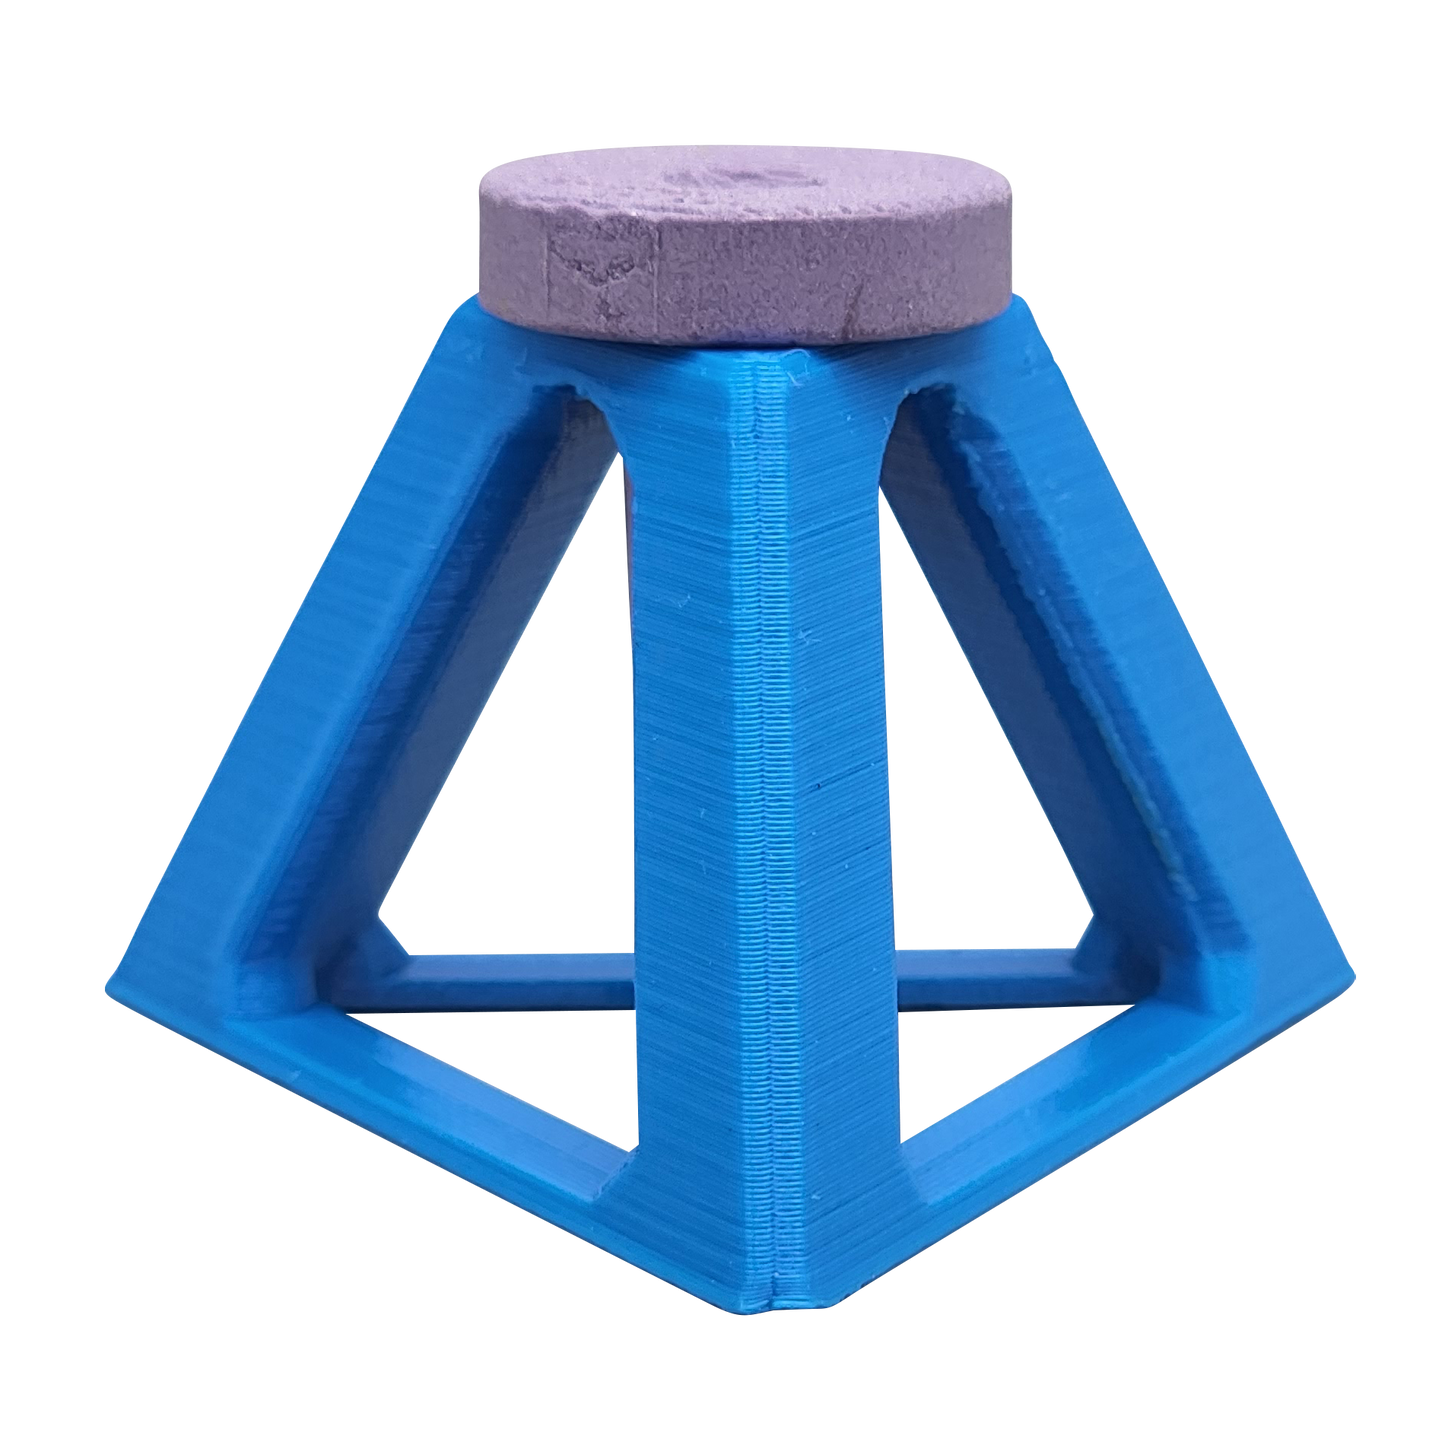 Coral Frag Holders - Pyramid Shaped Plug Stand